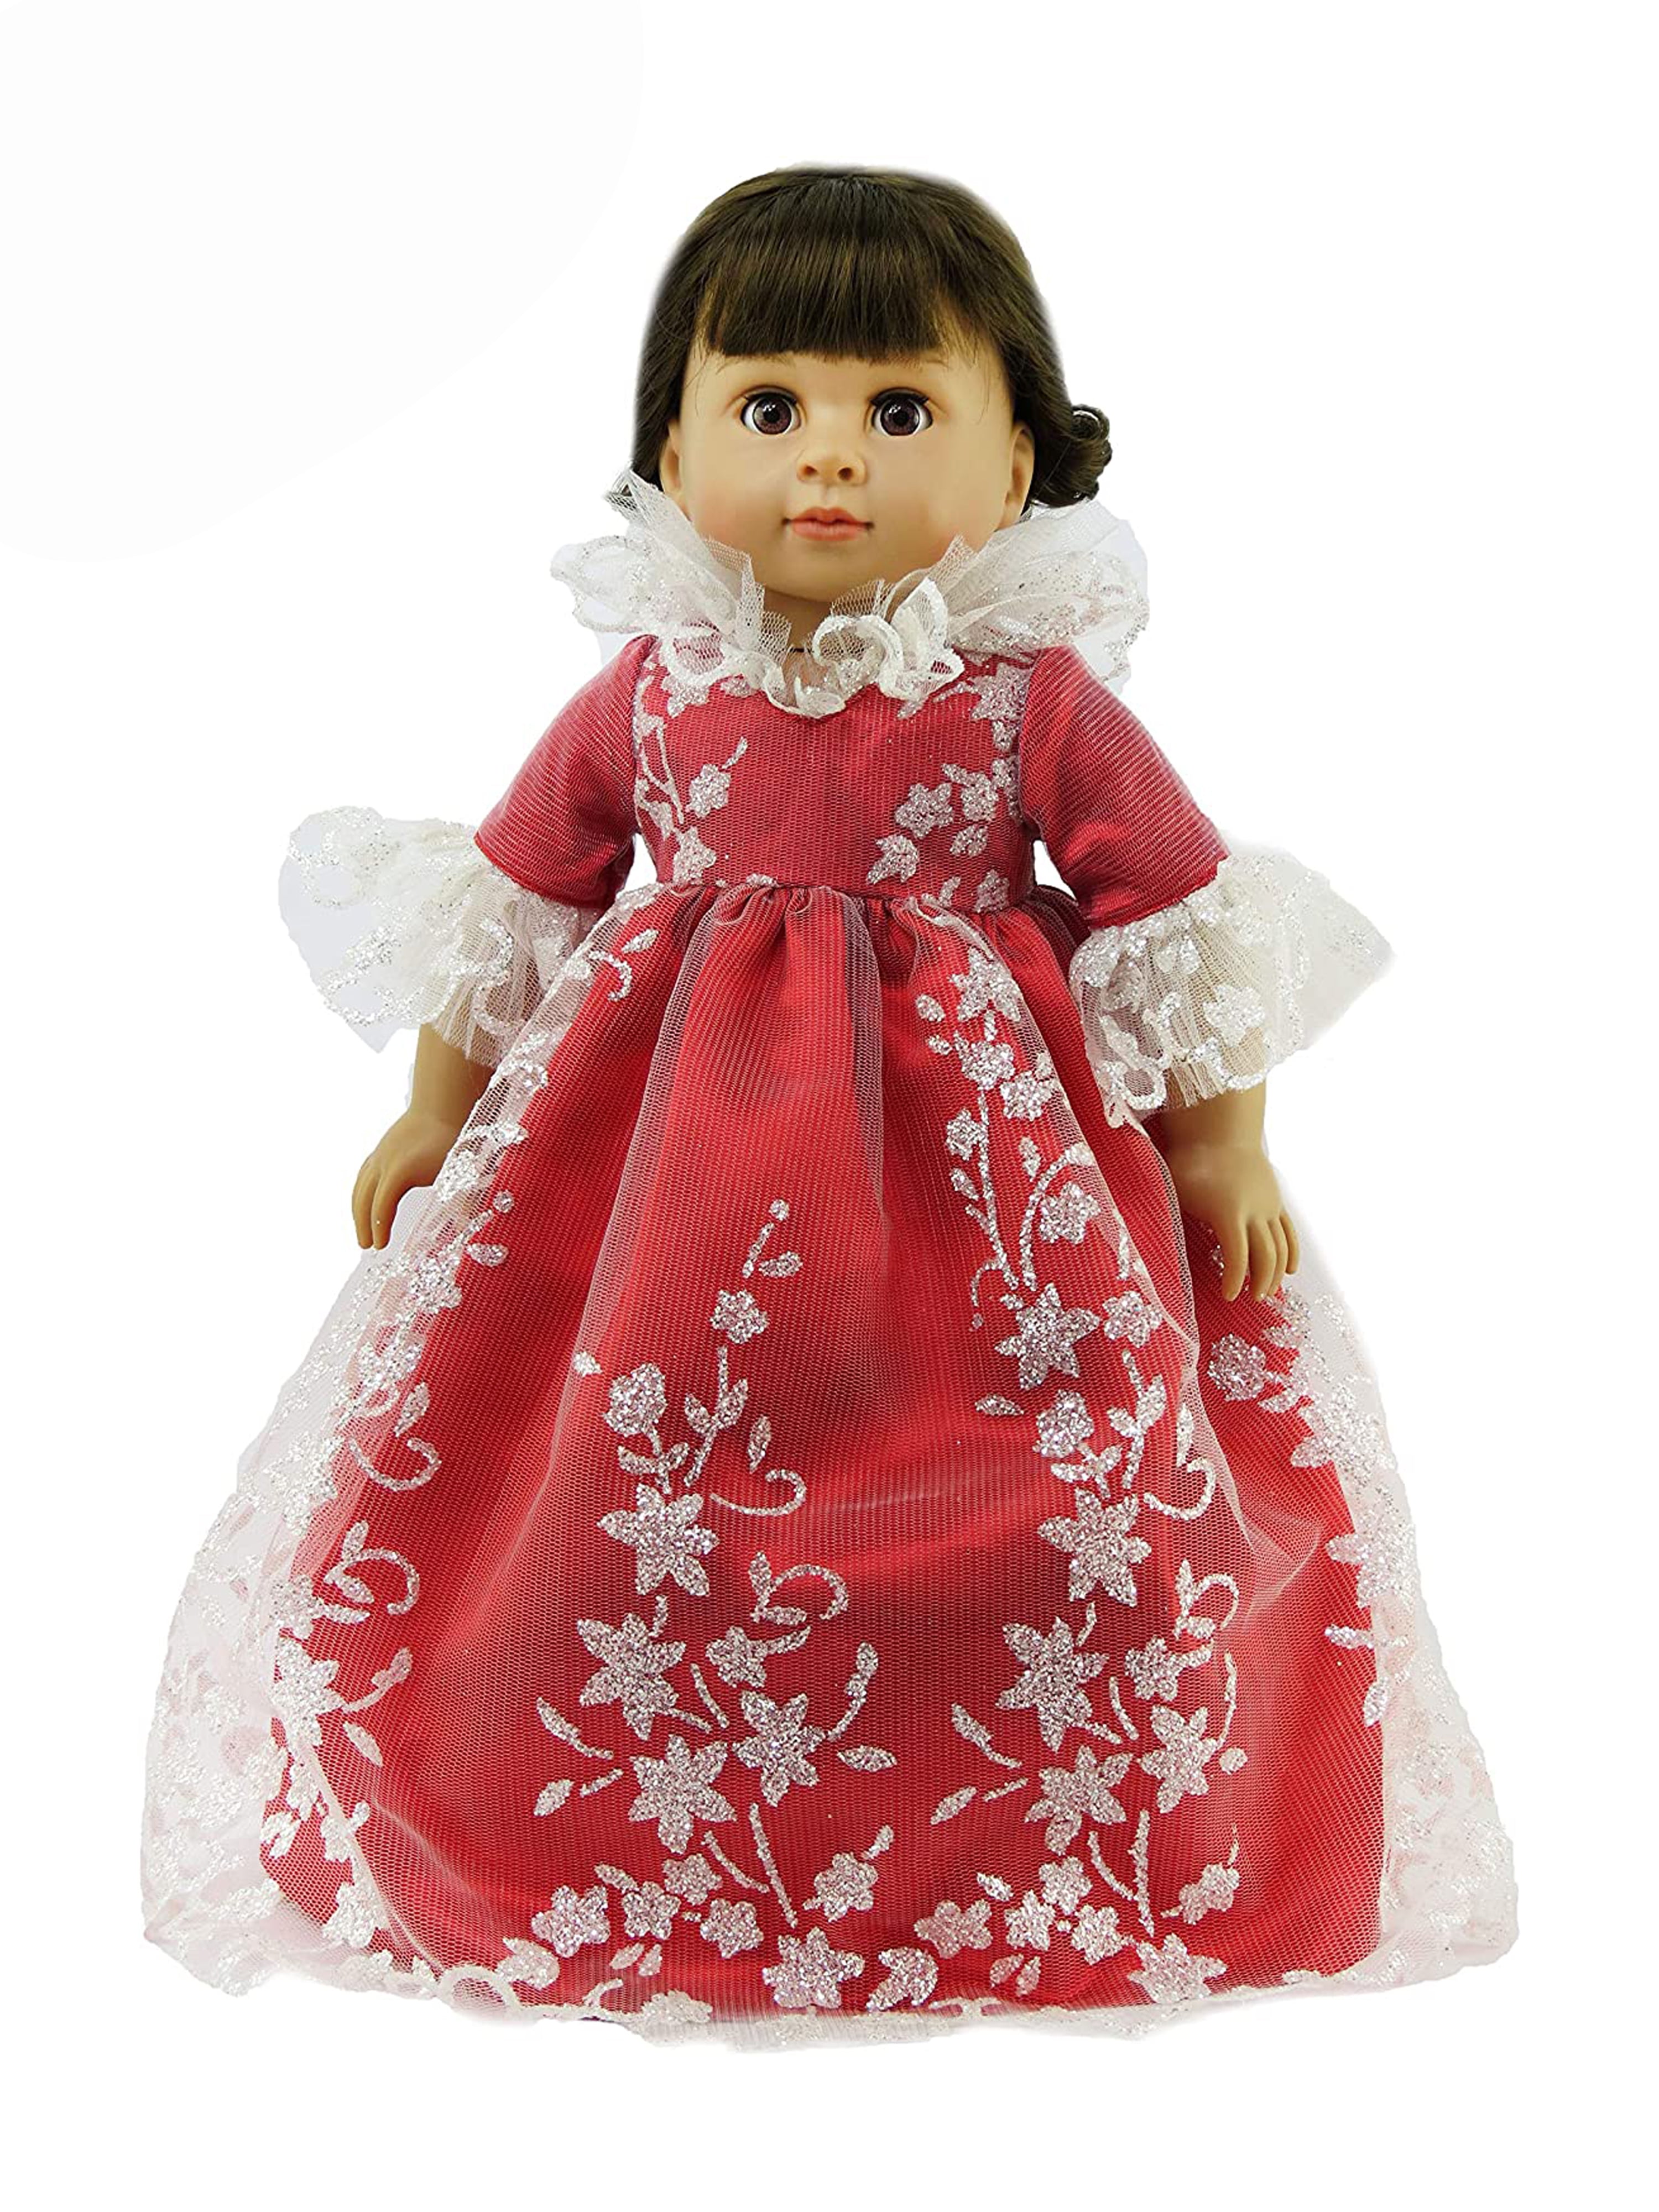 Multicolored floral cotton dress for that special occasion Doll Dress For all 18 inch dolls Get in time for Christmas Back Velcro closure